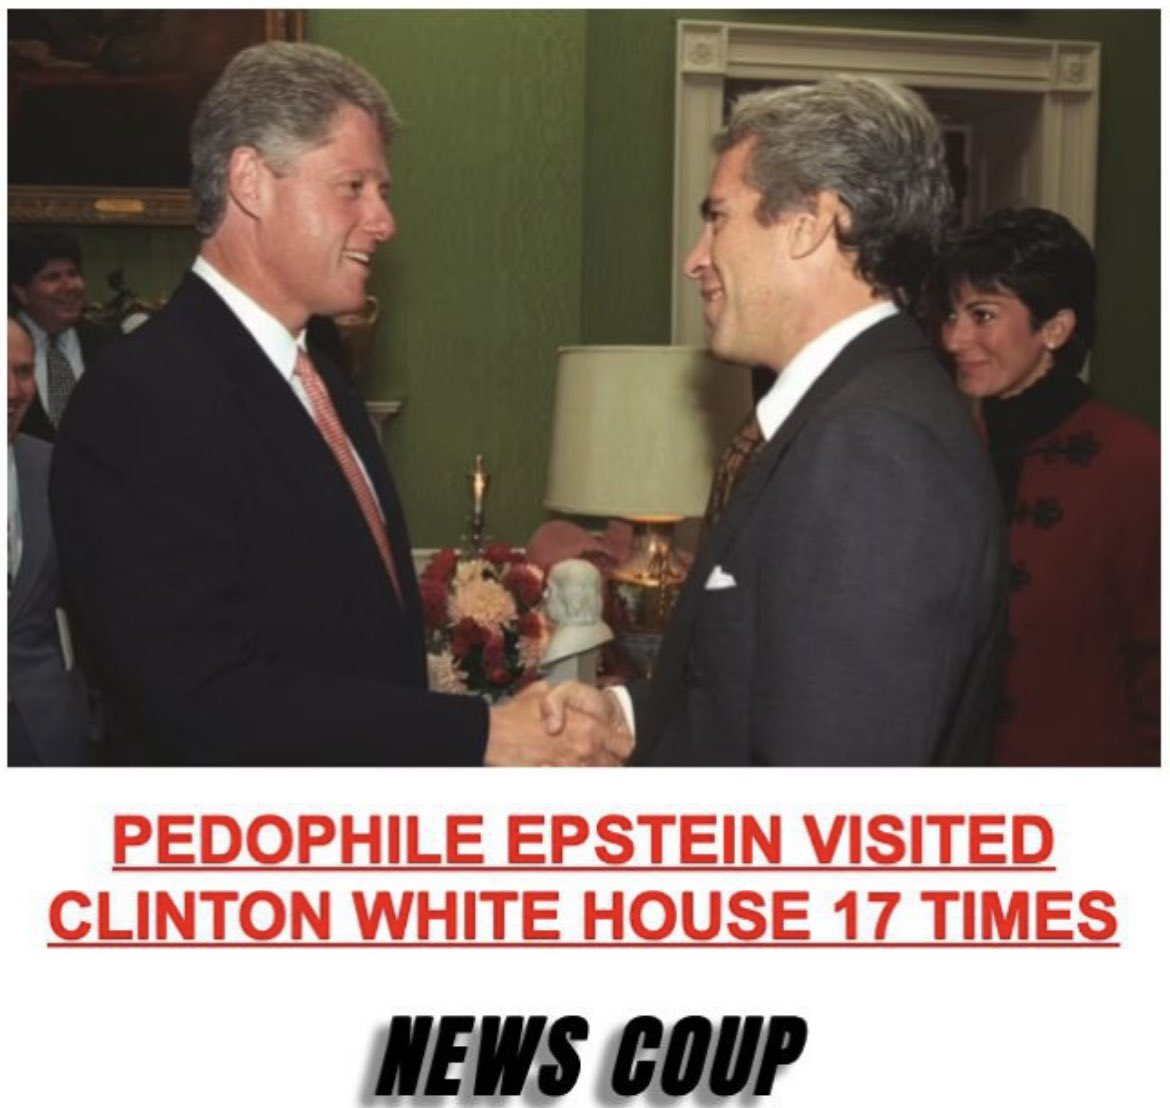 Jeffery Epstein visited Bill Clinton 17 times while he was in the White House 

Israel’s prime minister Ehud Barak visited Jeffrey Epstein’s house over 30 times 

It almost feels as if a small foreign nation is giving our leaders orders 🤔